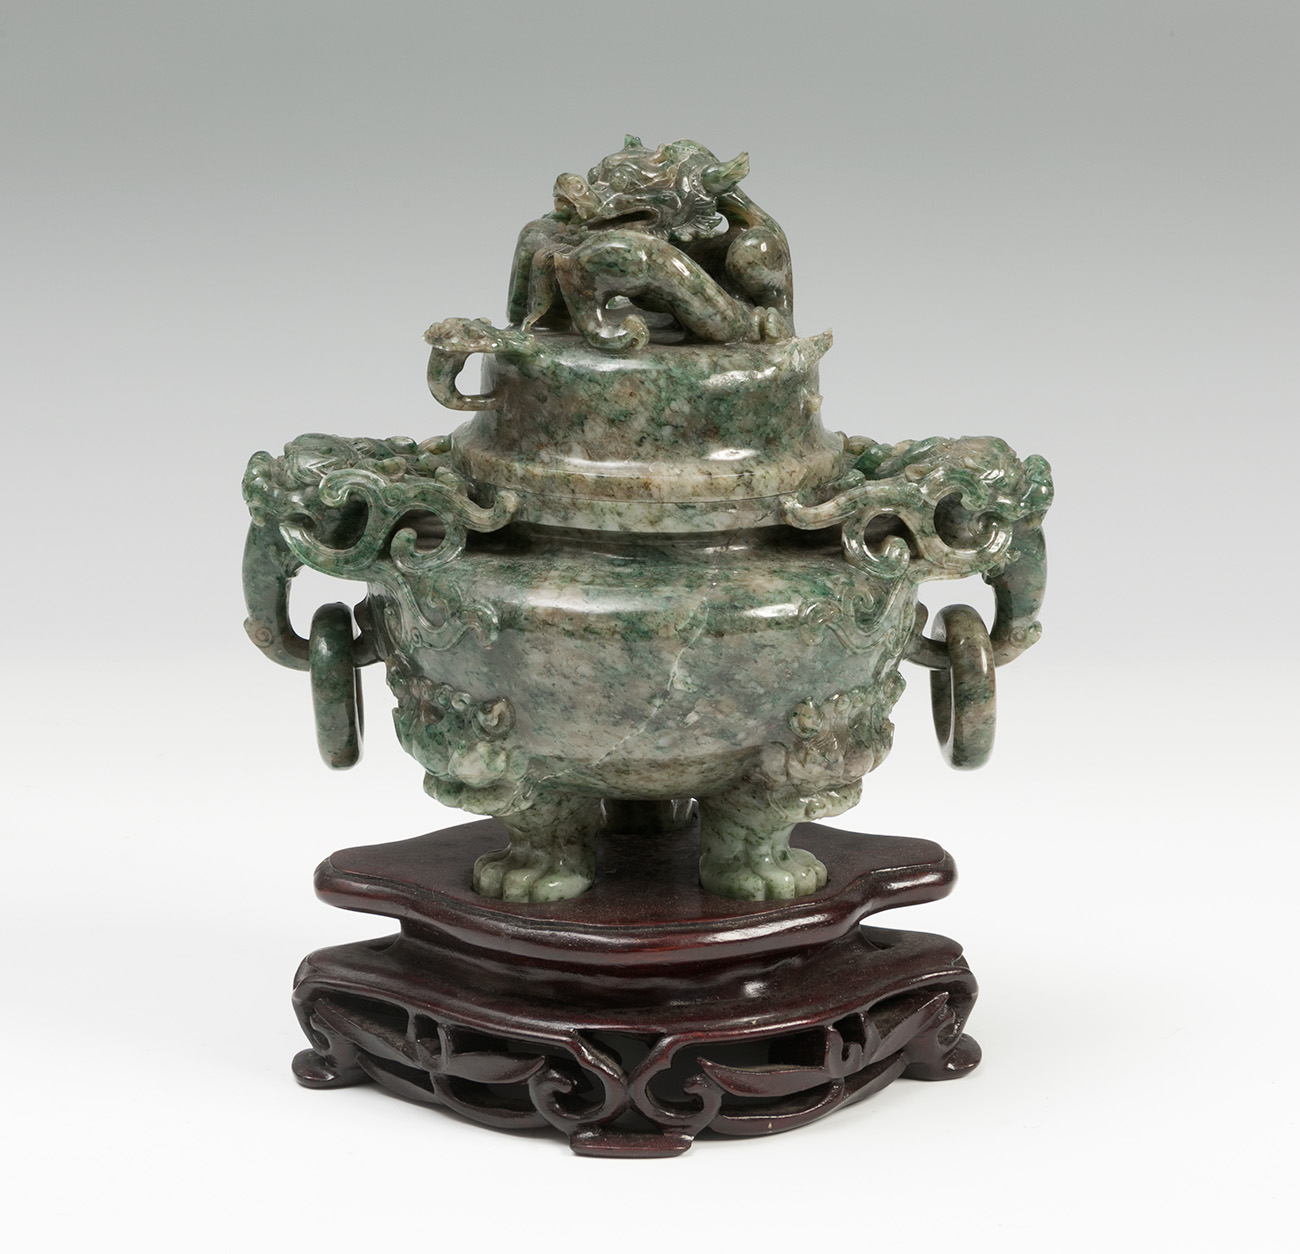 Tibor. China, early 20th century. Nephrite jade. Wooden base. Measurements: 13 x 14 x 9,5 cm; 17